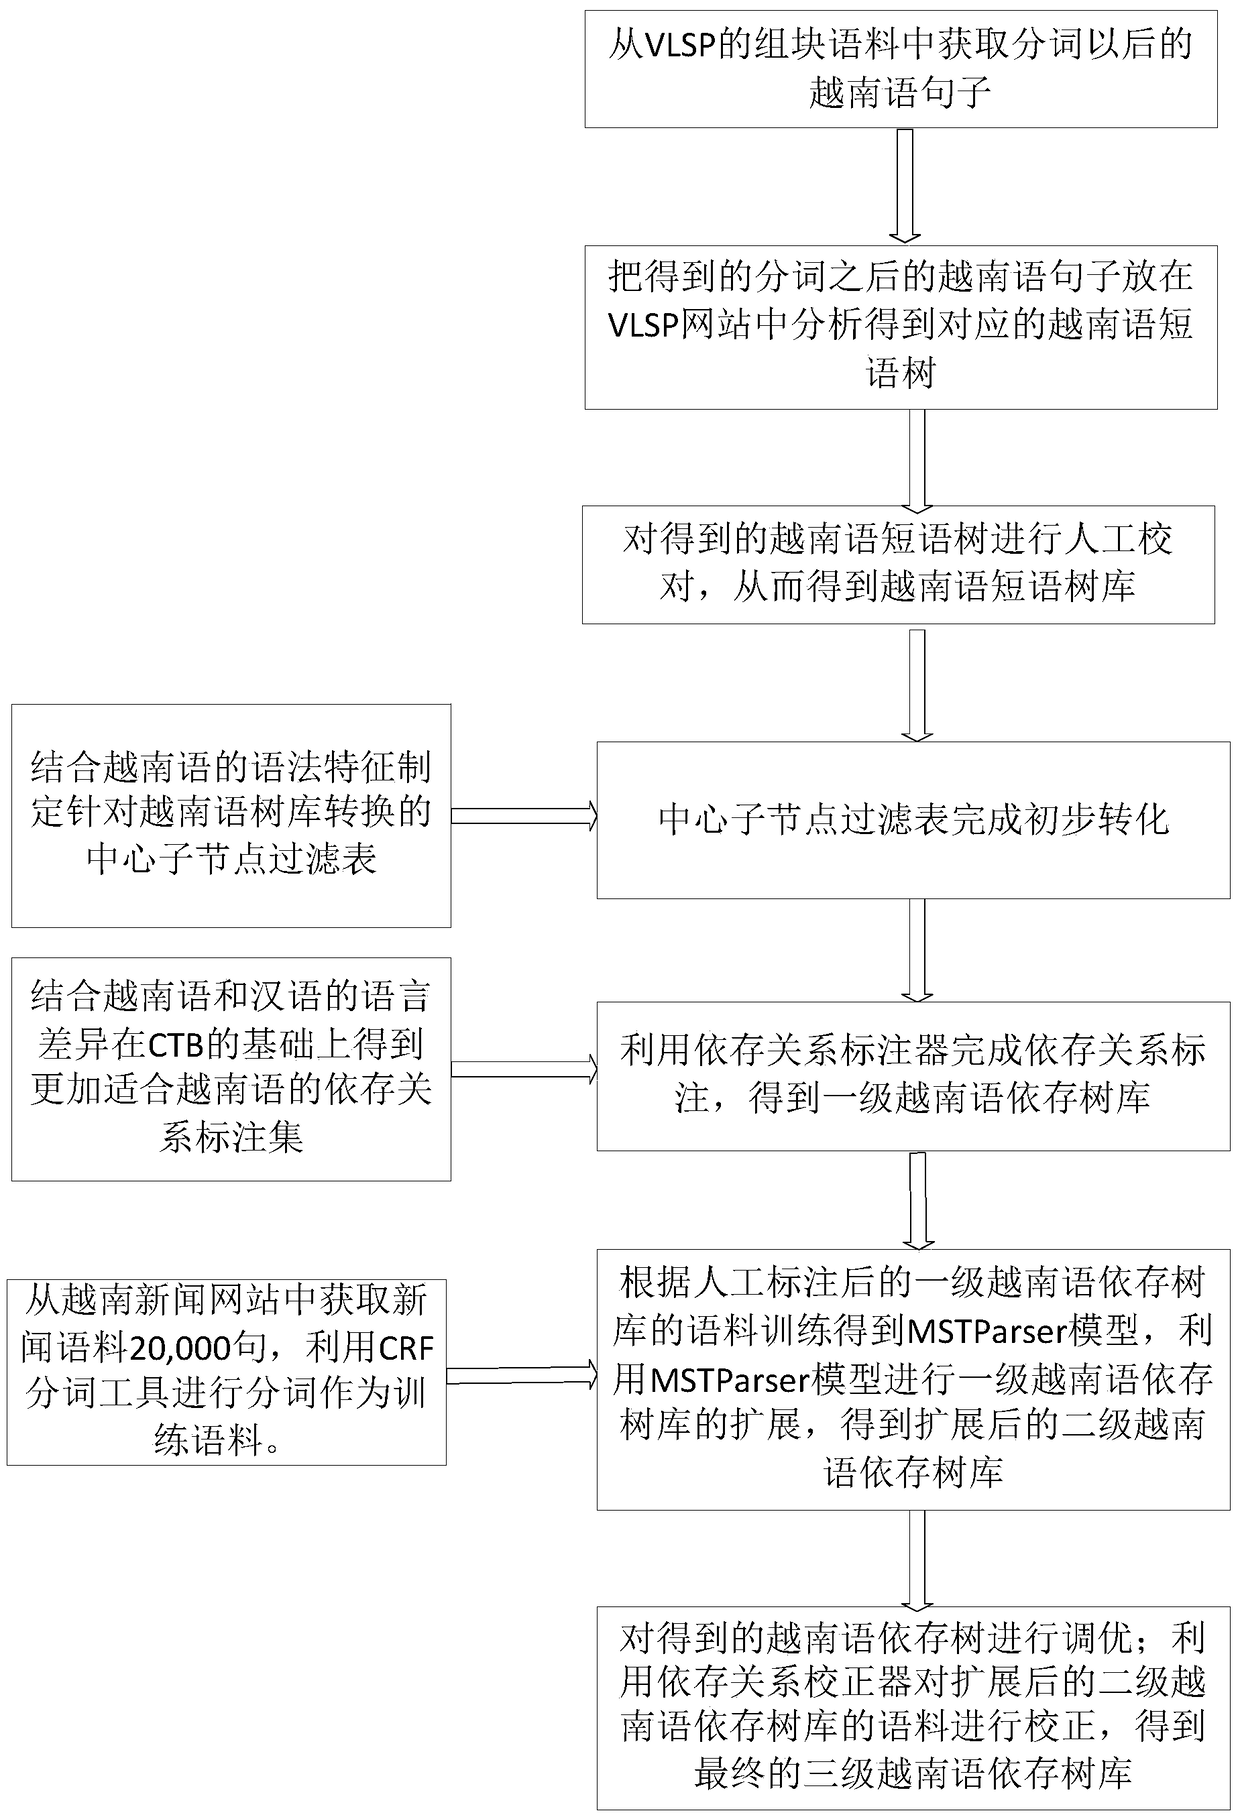 A Phrase Tree to Dependency Tree Conversion Method Integrating Vietnamese Grammatical Features